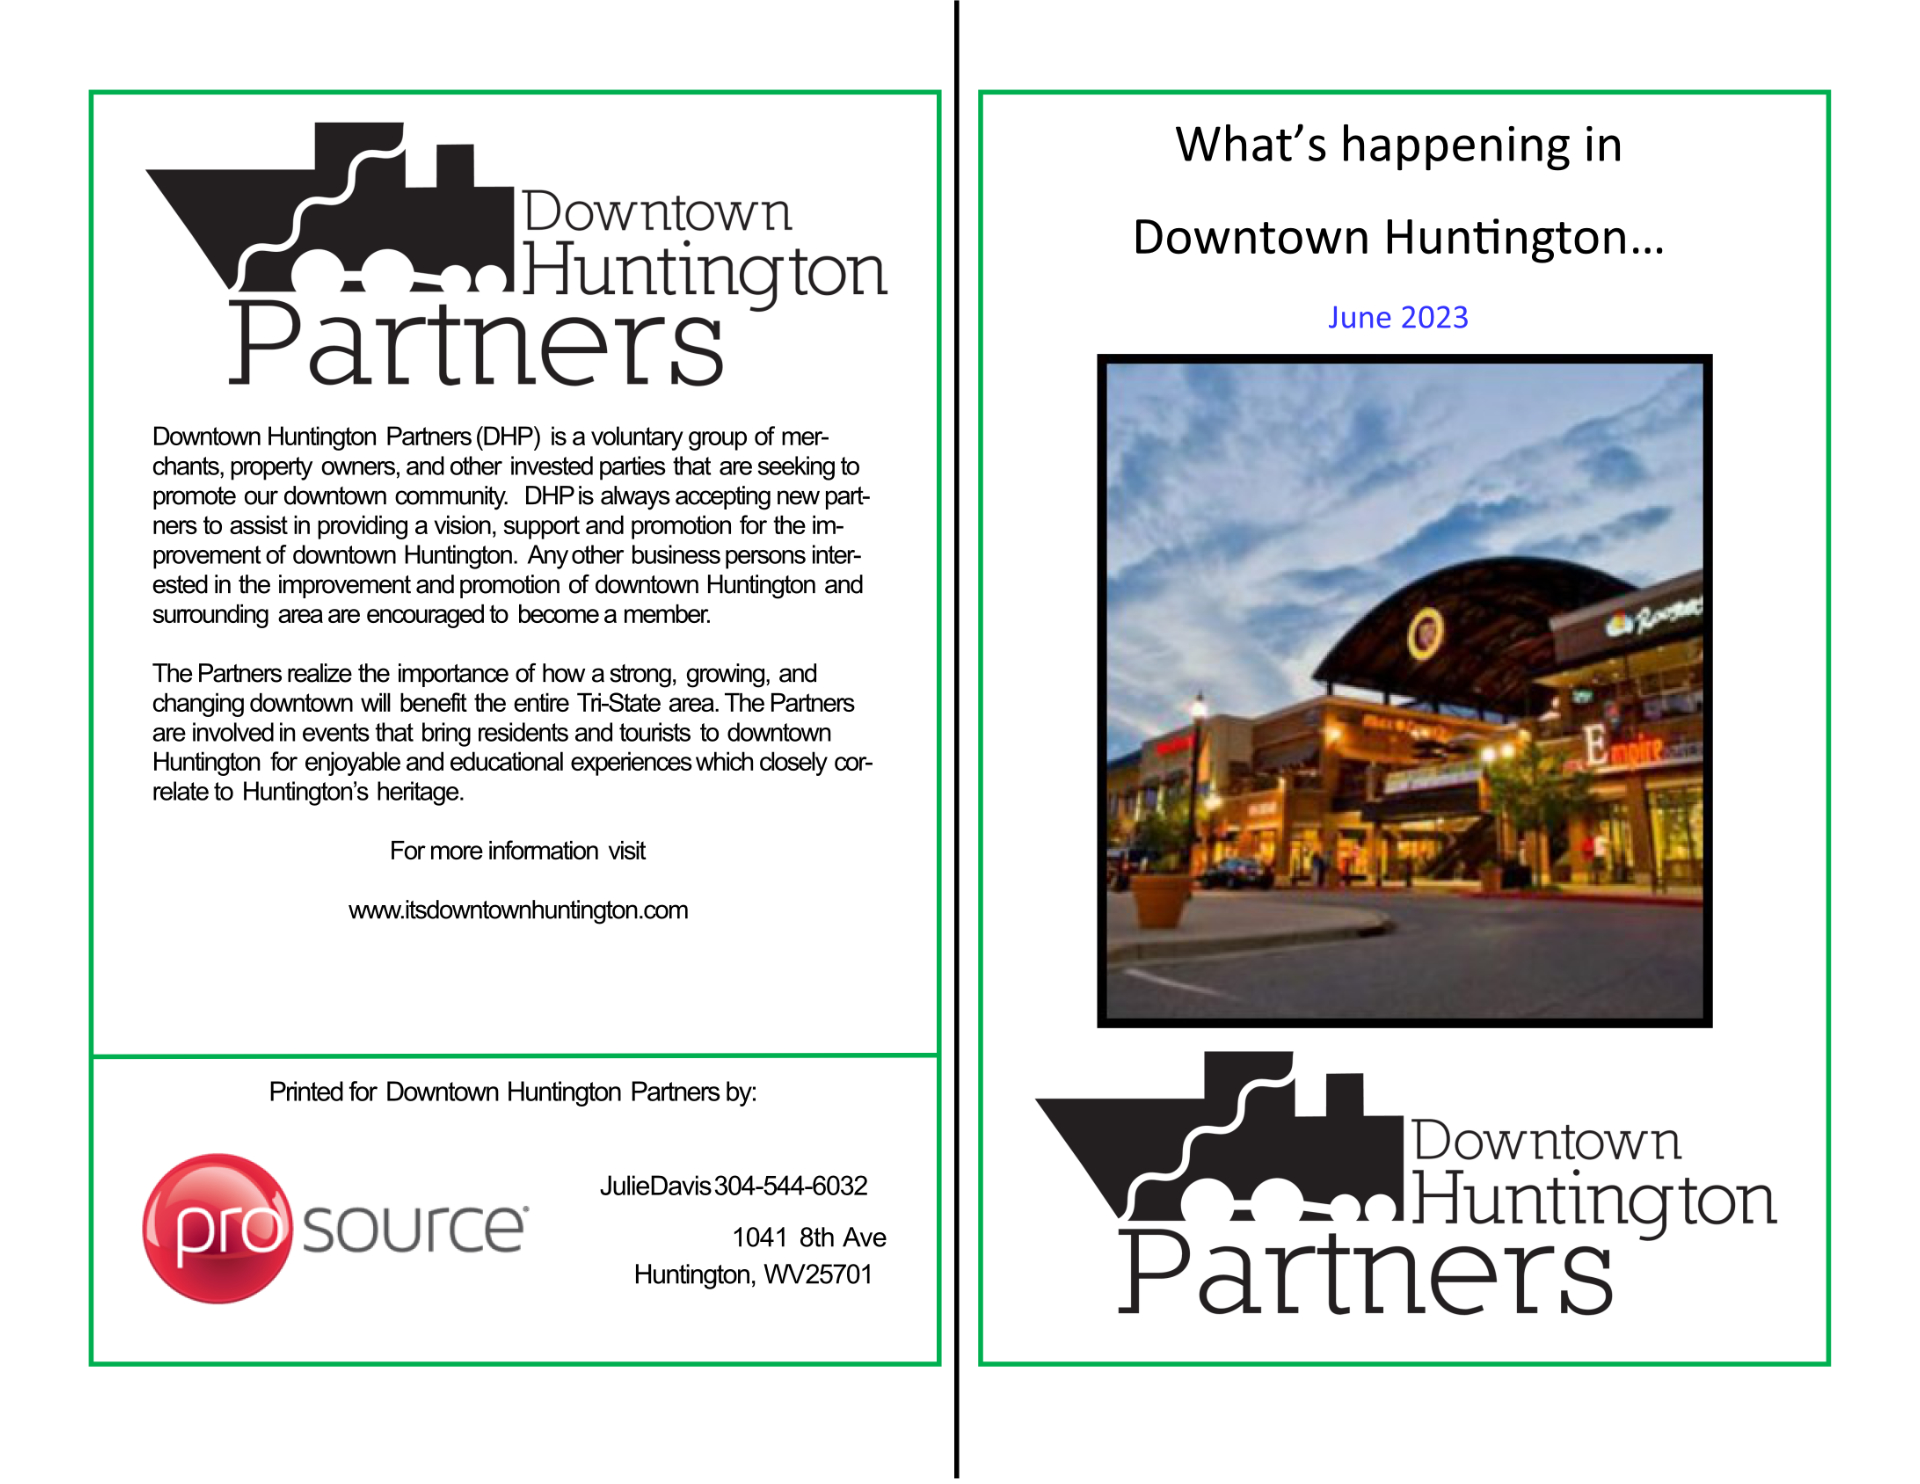 January 2023 Its down town huntington Newsletter